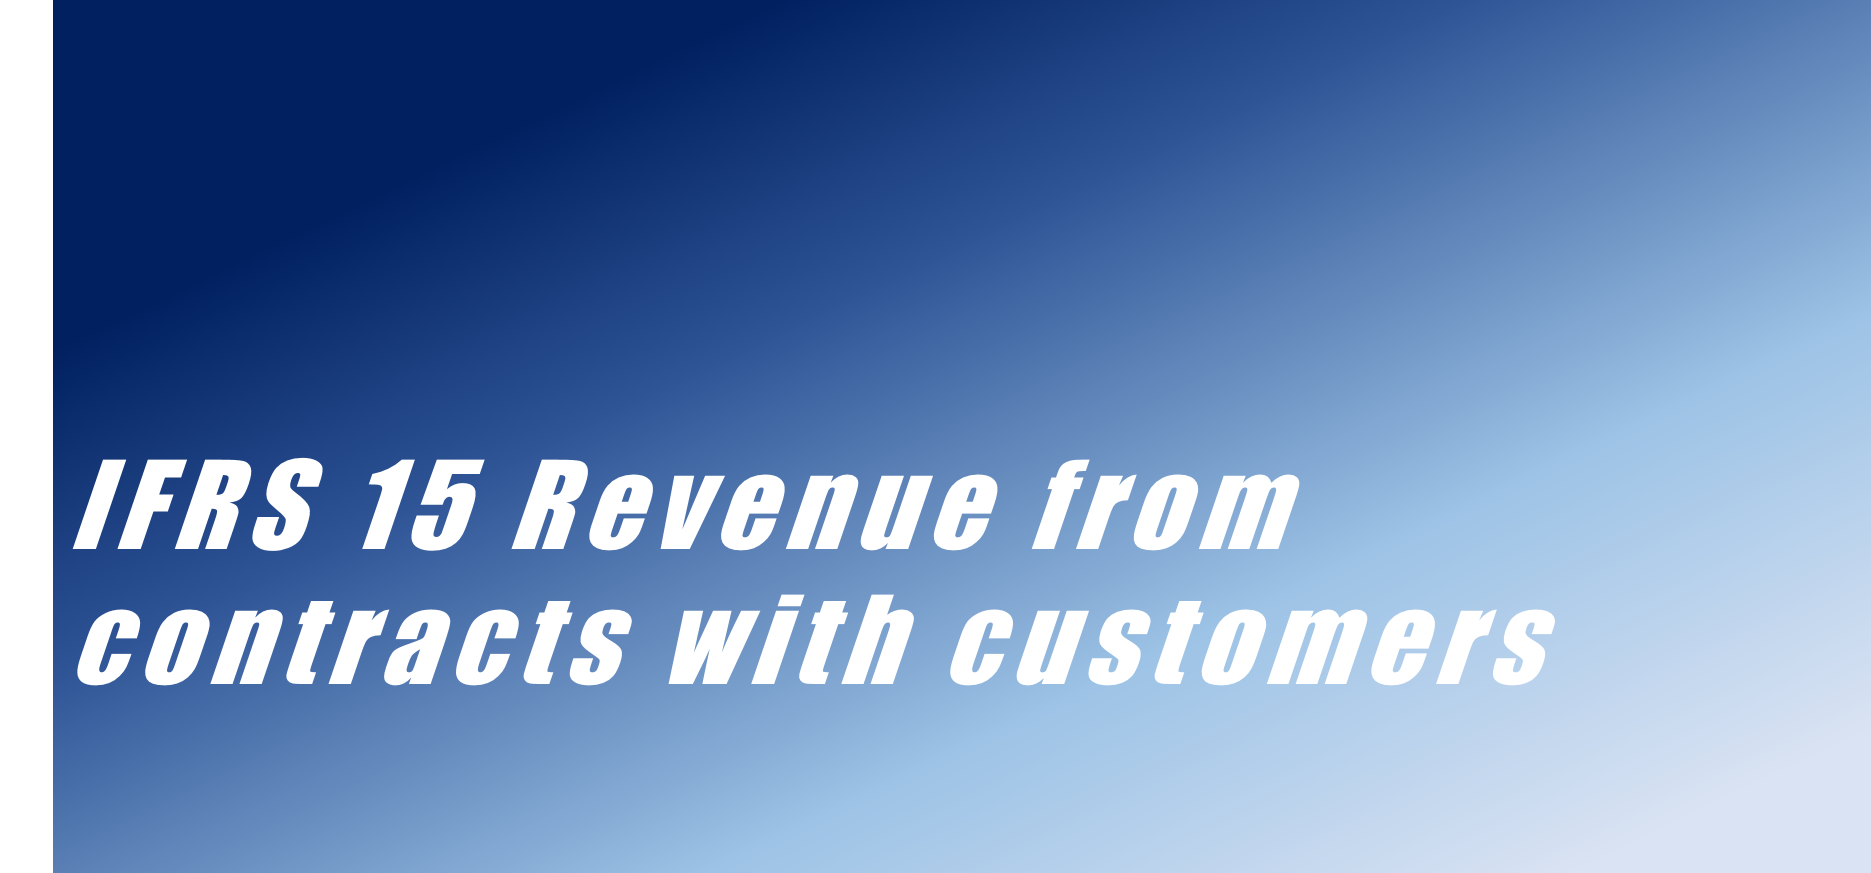 ifrs 15 revenue from contracts with customers